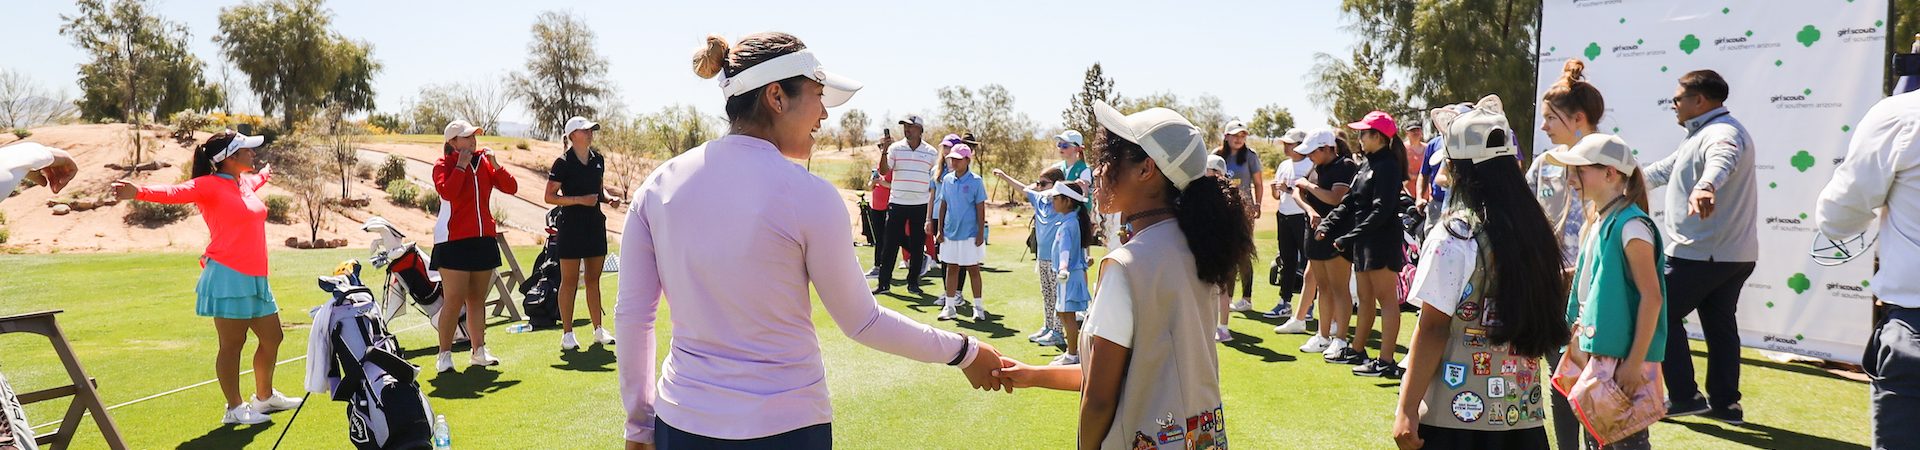  girl scout and pro golfer shaking hands 